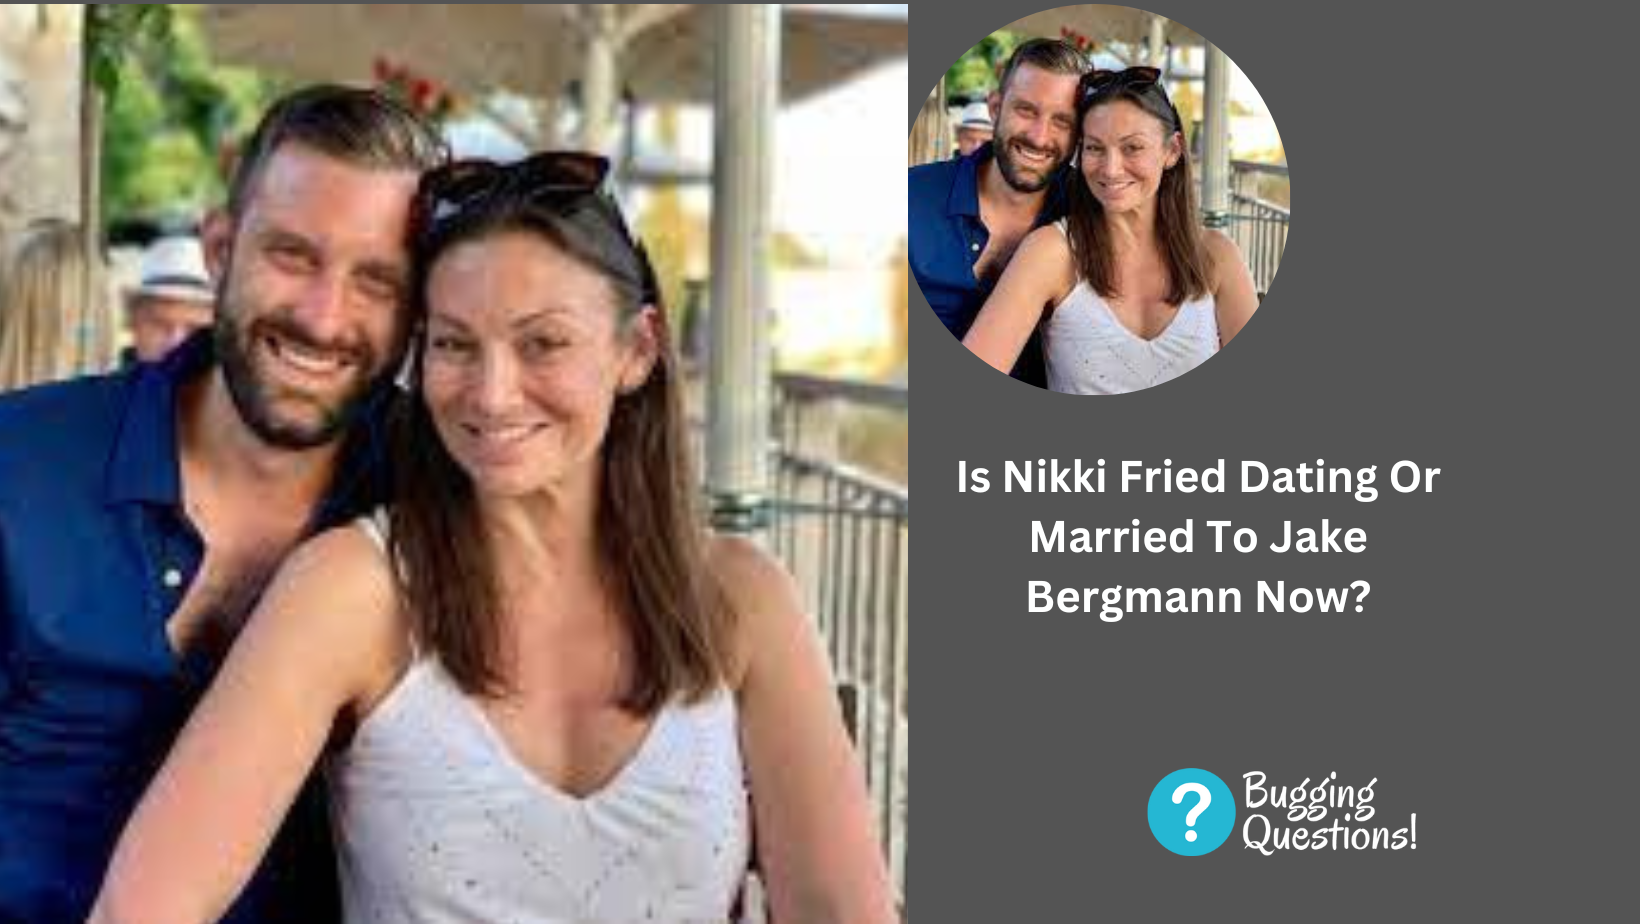 Is Nikki Fried Dating Or Married To Jake Bergmann Now?